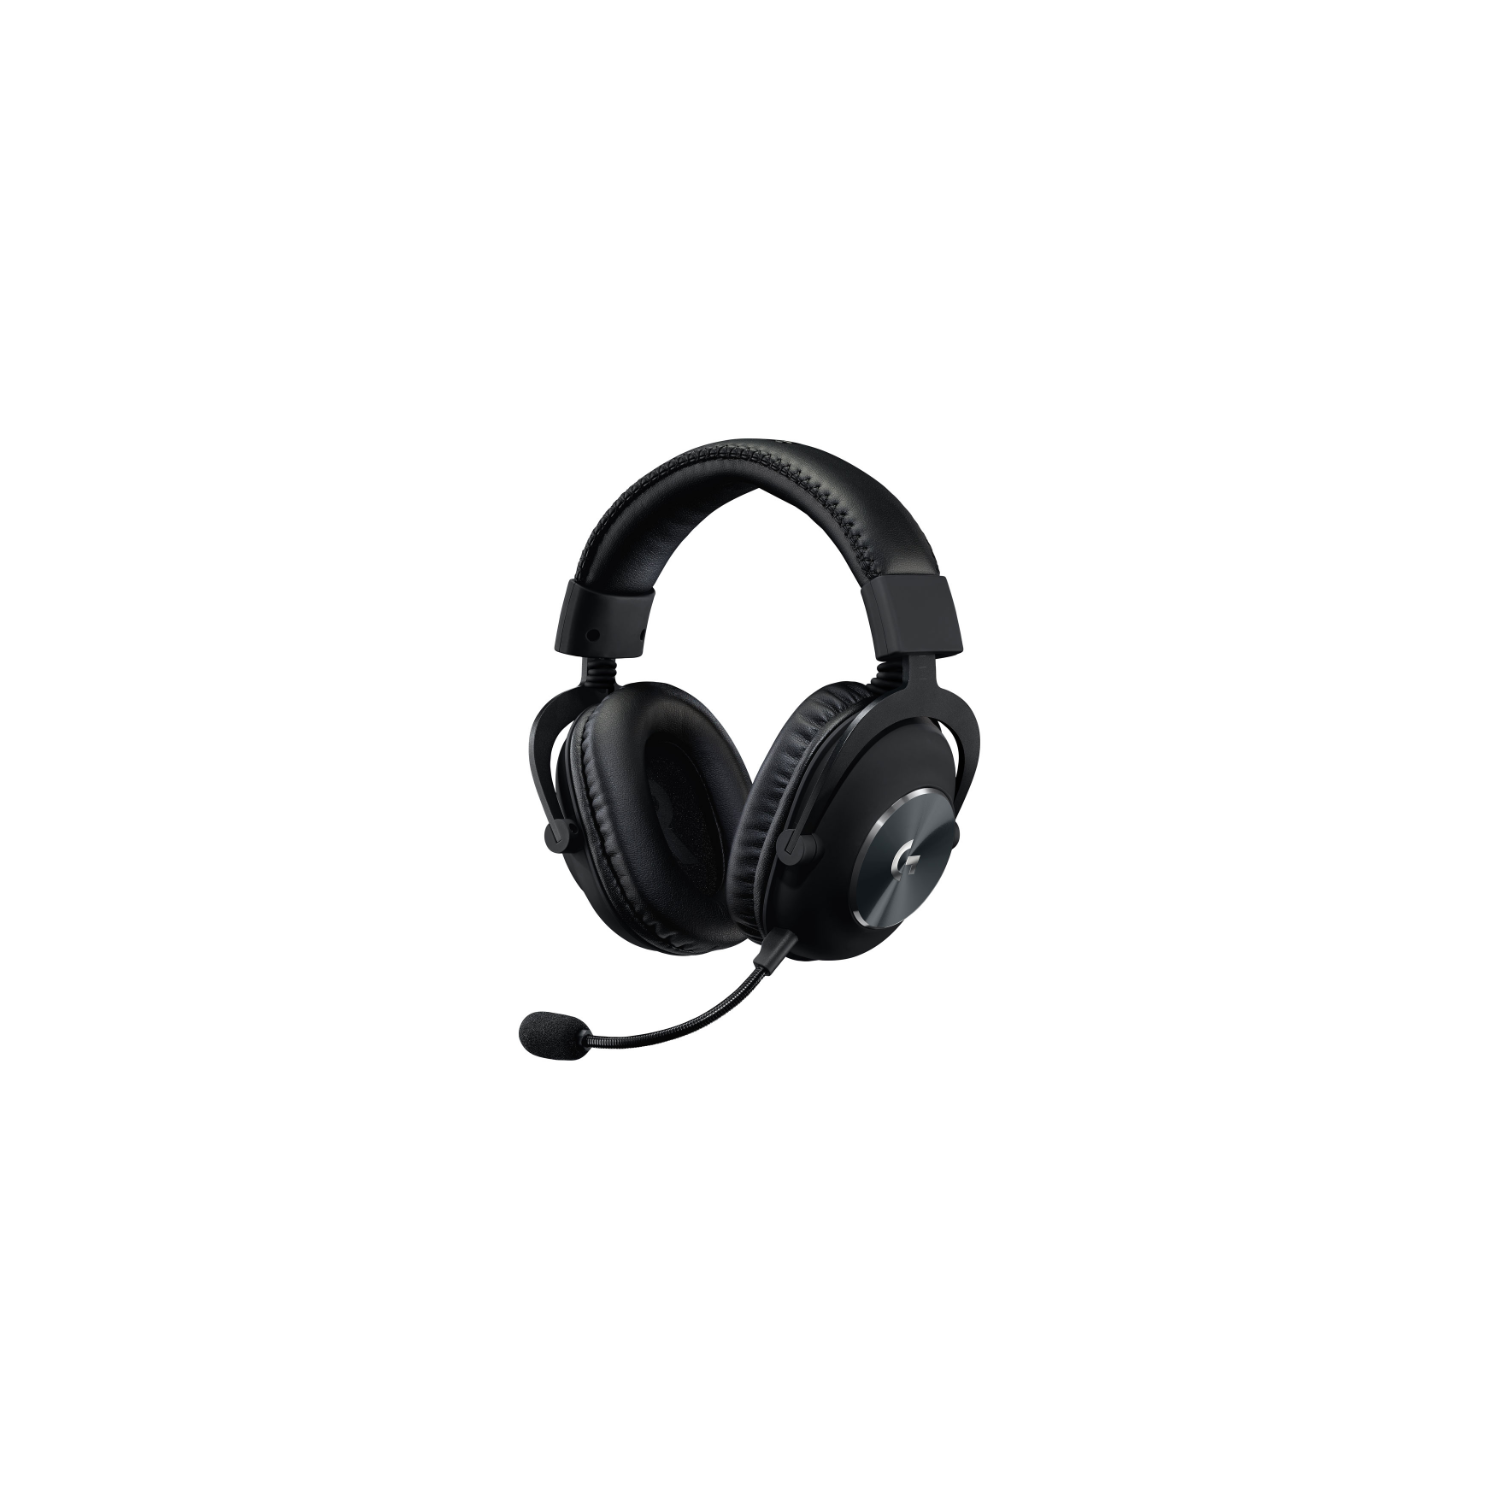 Refurbished (Good) - Logitech Pro X Gaming Headset with Microphone - Black